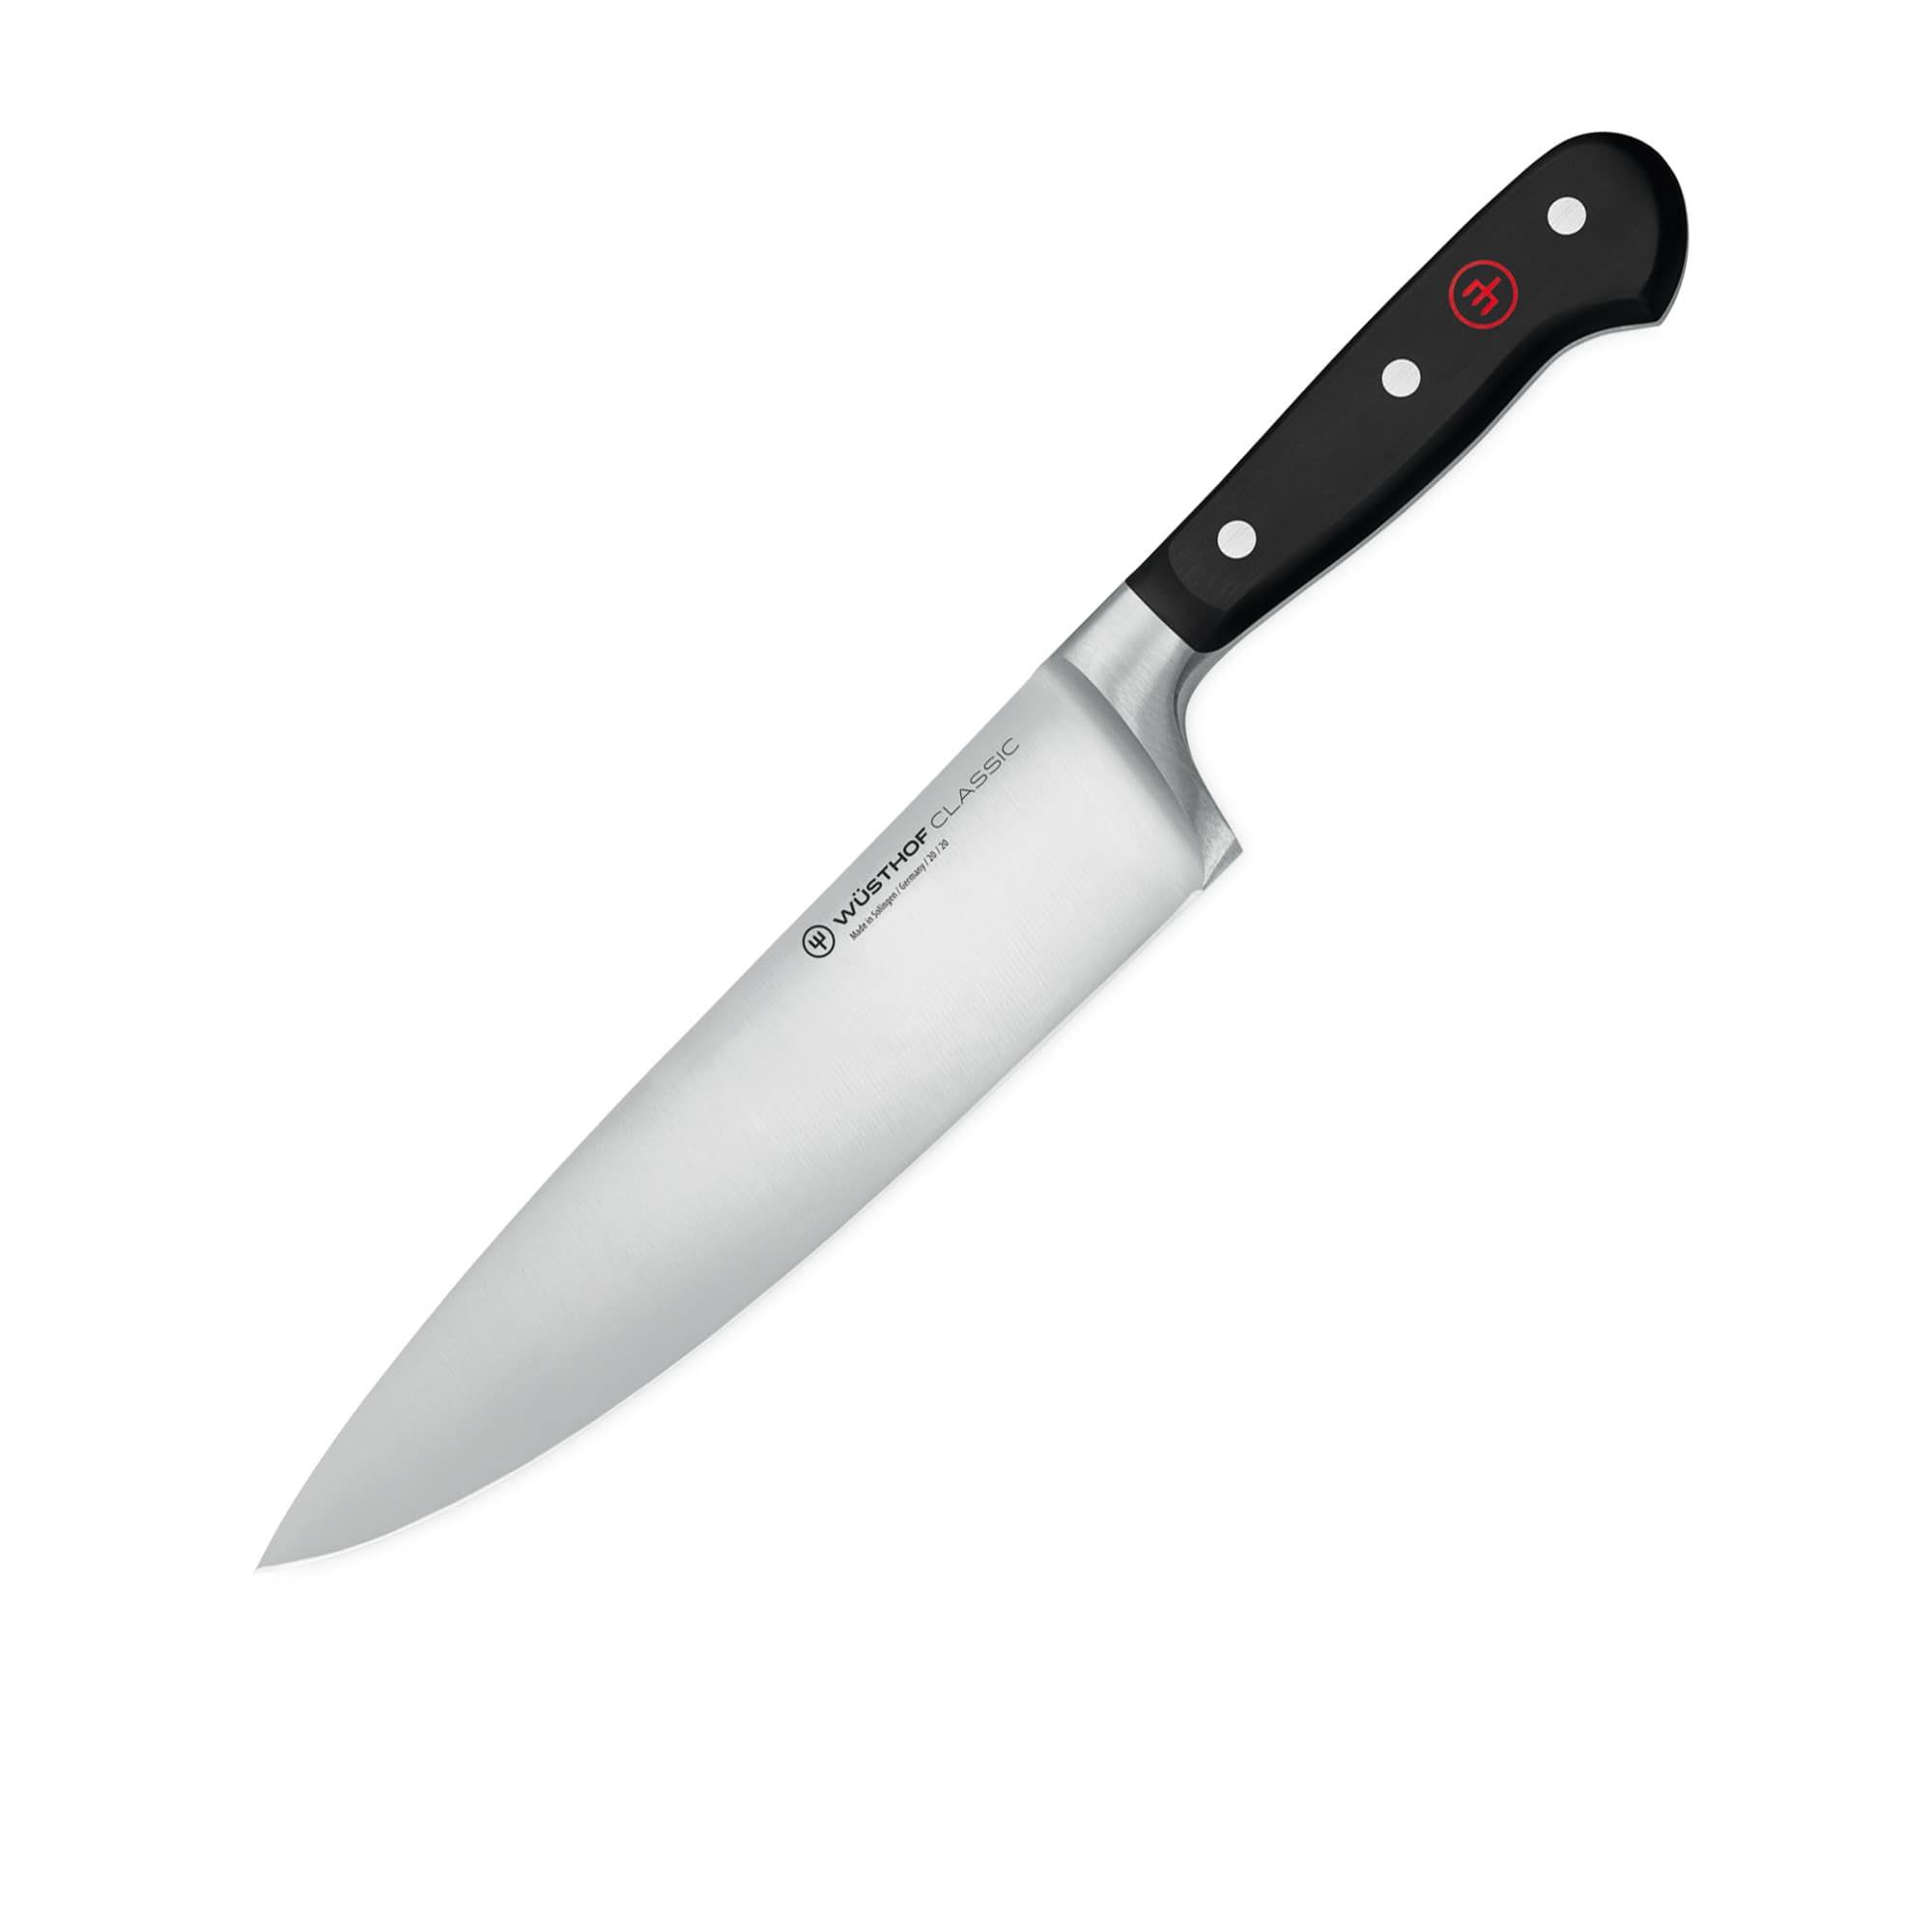 Wusthof Classic 8 in. Cook's Knife